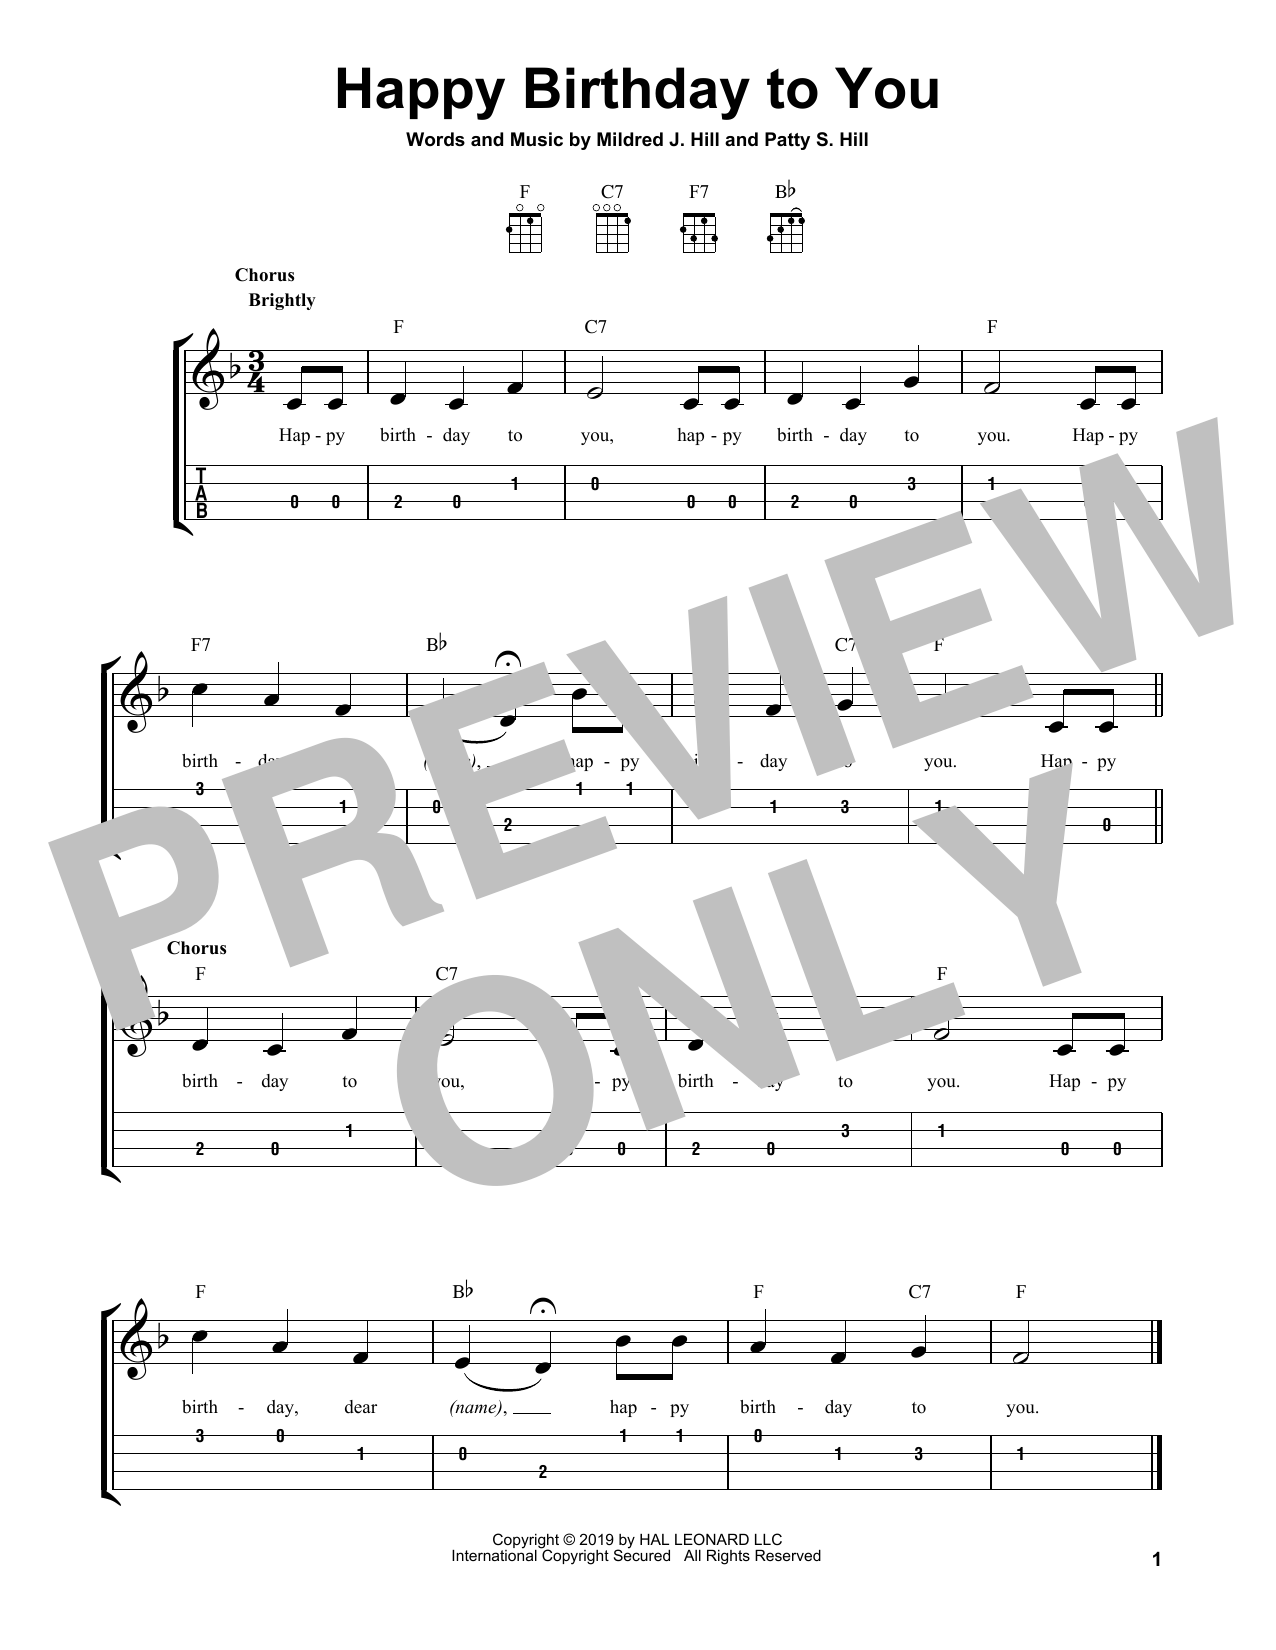 Download Mildred J. Hill & Patty S. Hill Happy Birthday To You Sheet Music